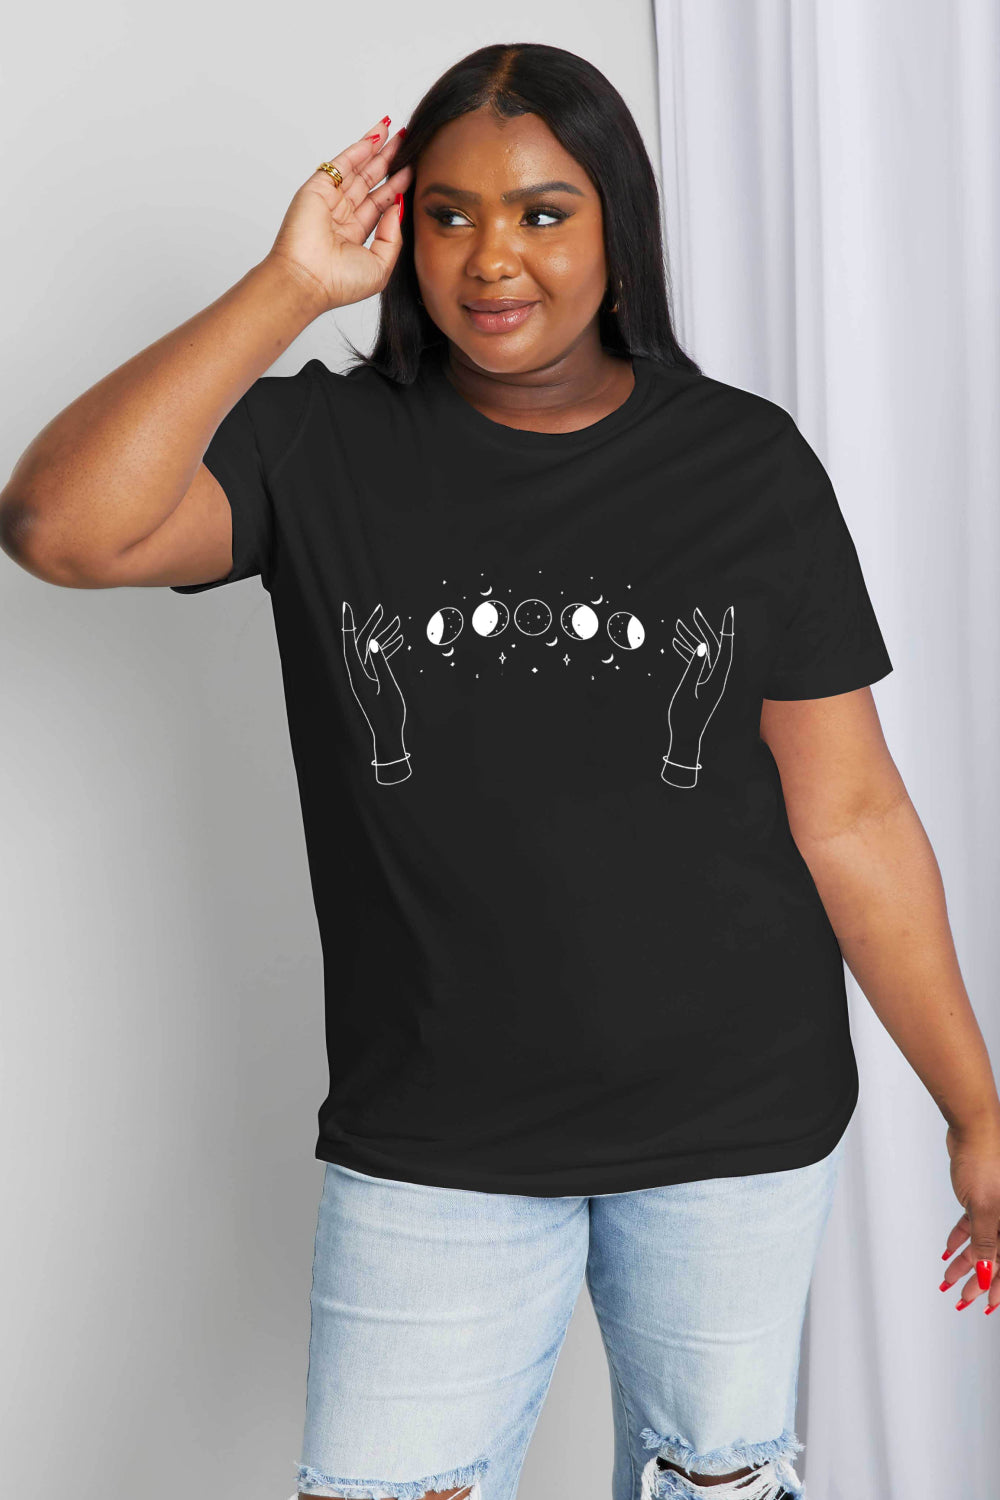 Simply Love Full Size Lunar Phase Graphic Cotton Tee